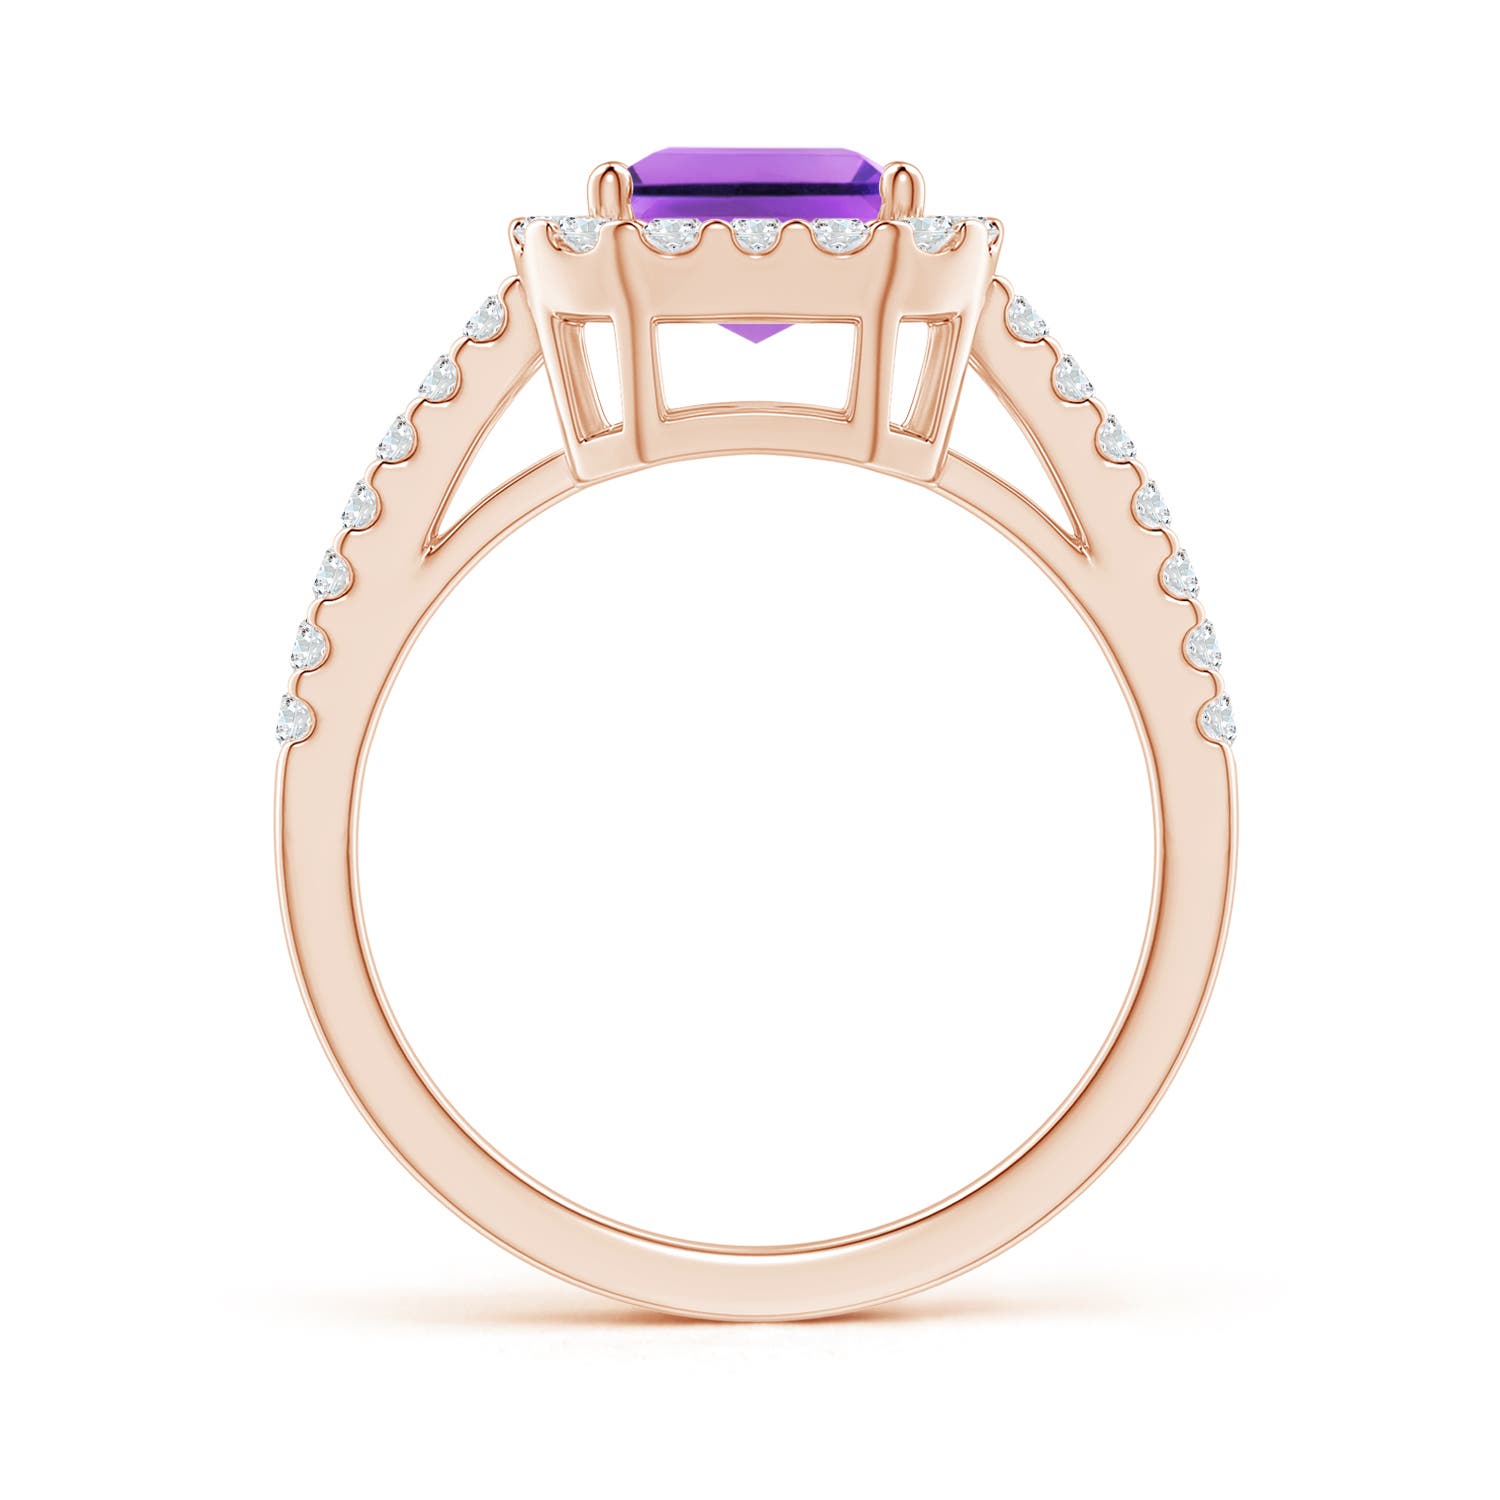 AA - Amethyst / 2.68 CT / 14 KT Rose Gold